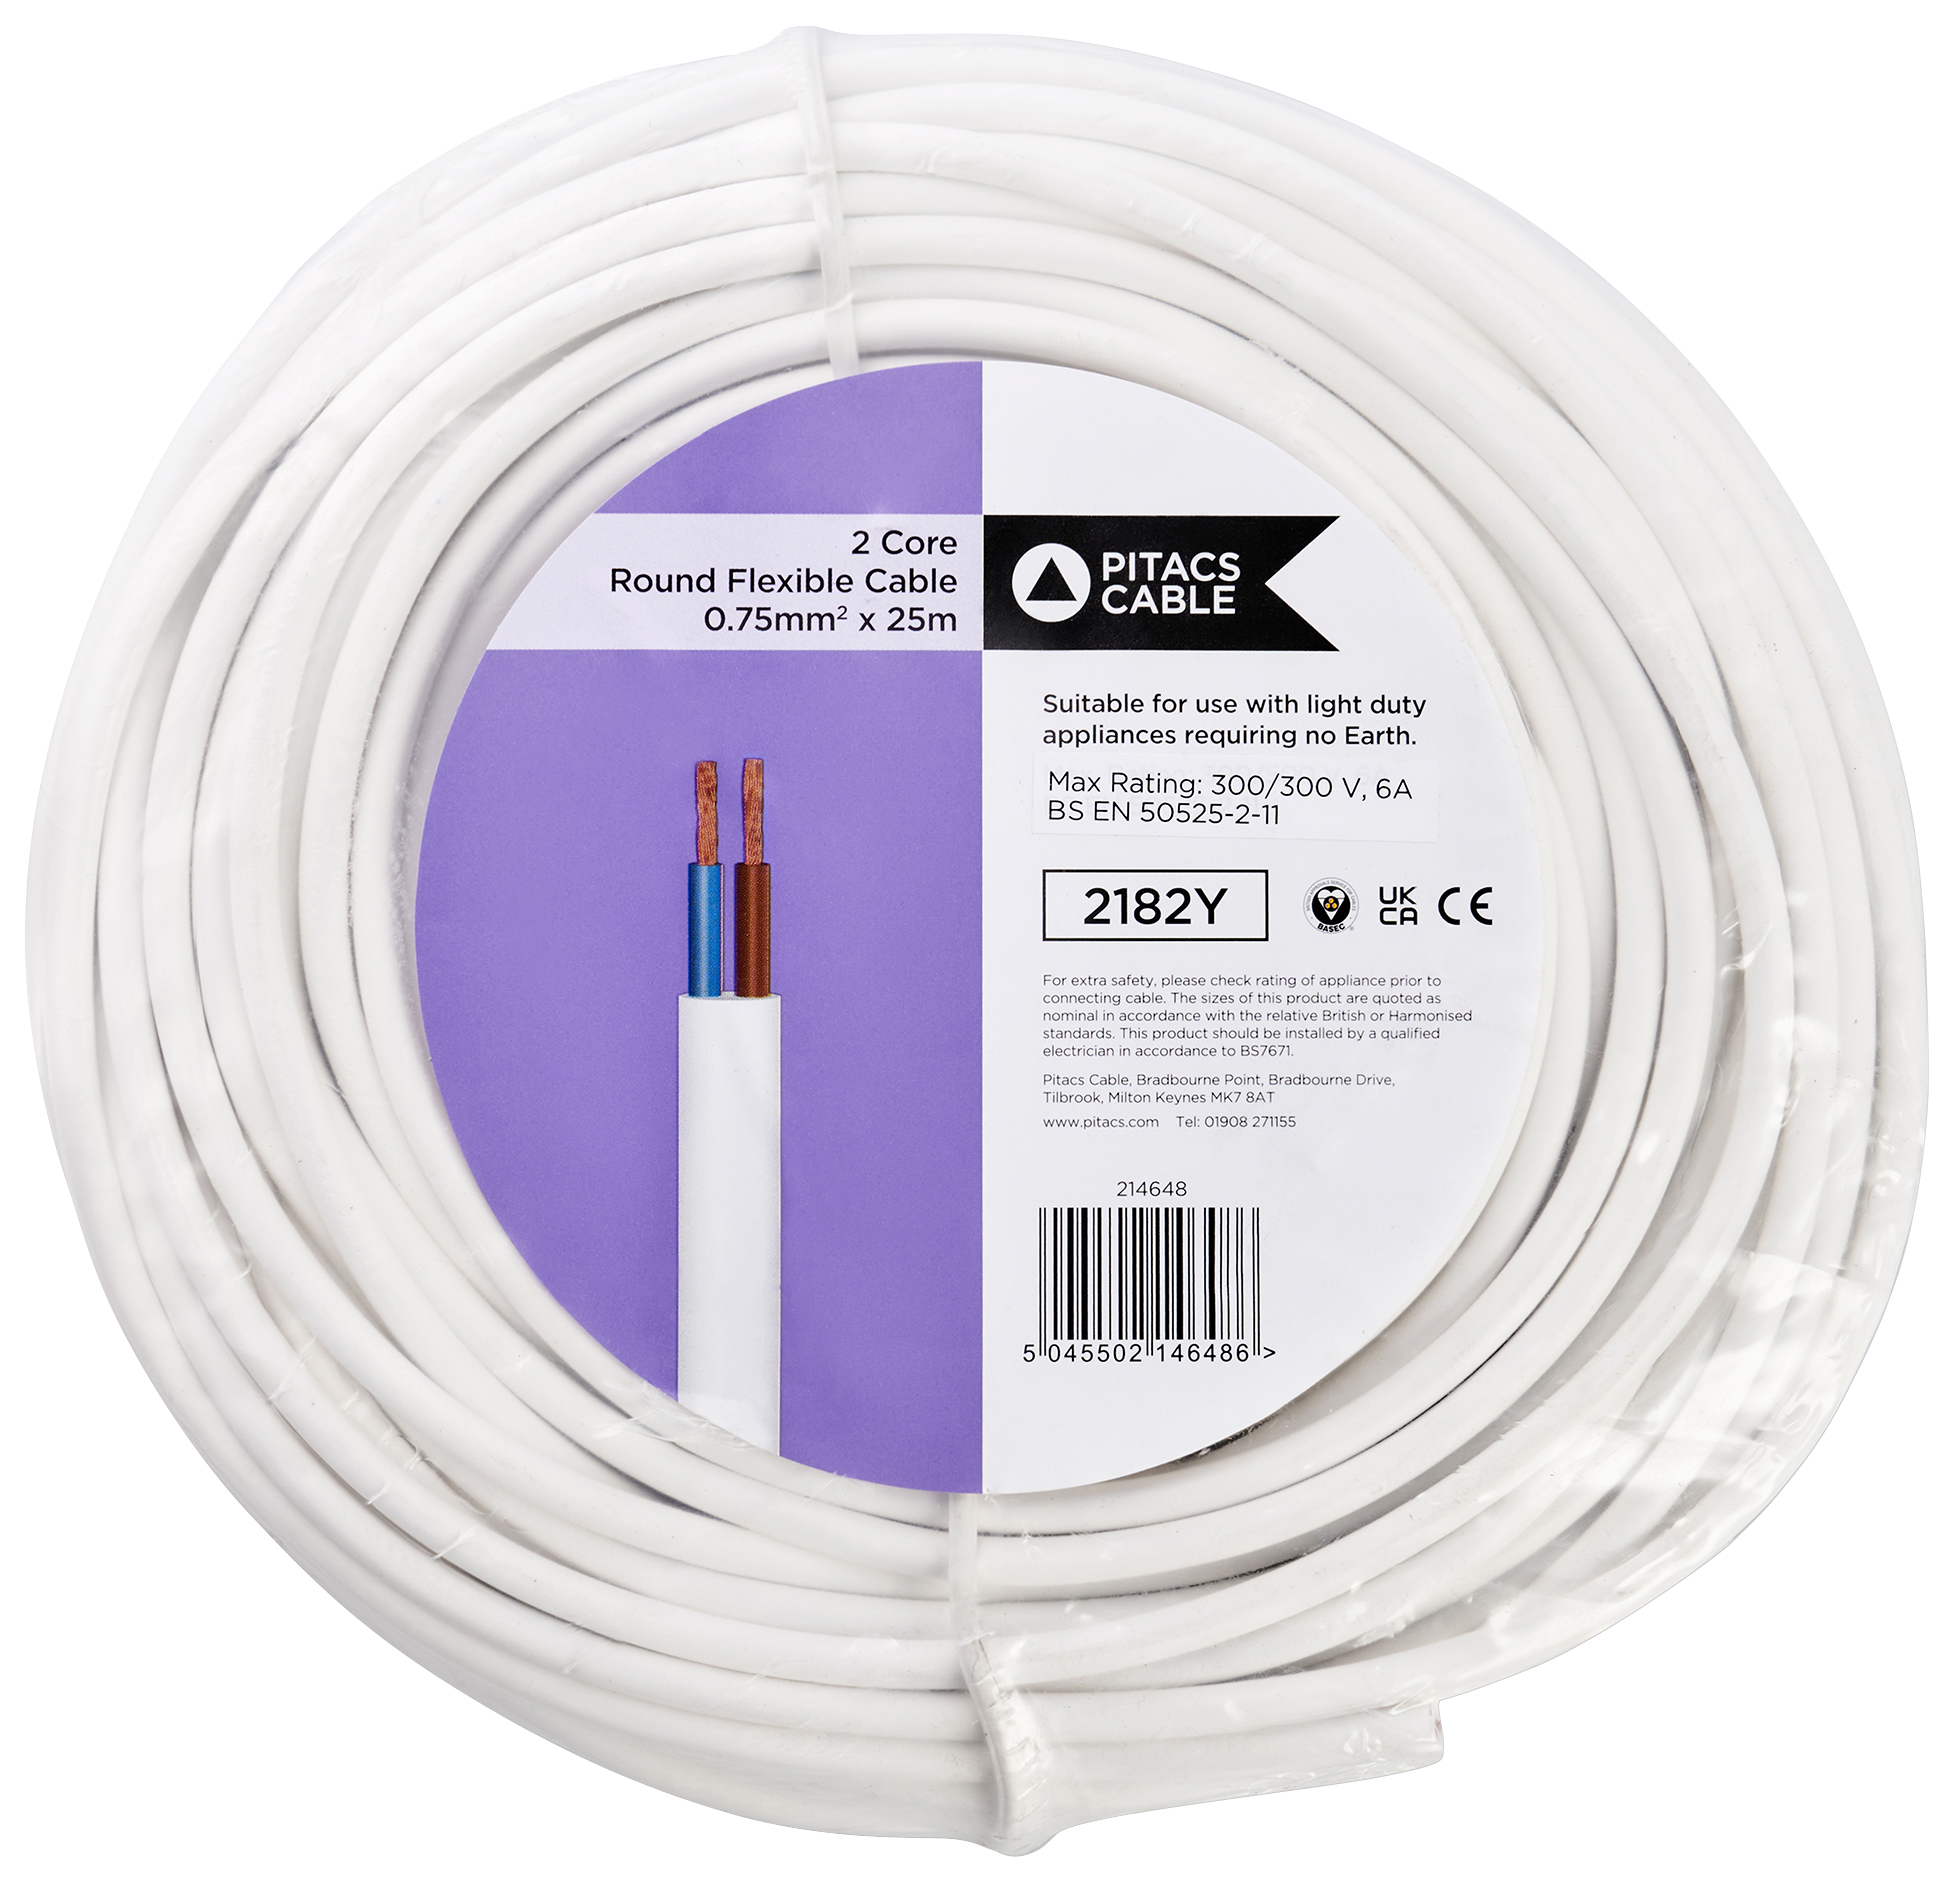 4 Core WHITE PVC Flex Electrical Cable Round Wire 0.75 1 1.5 2.5mm 3184Y  H05VV-F